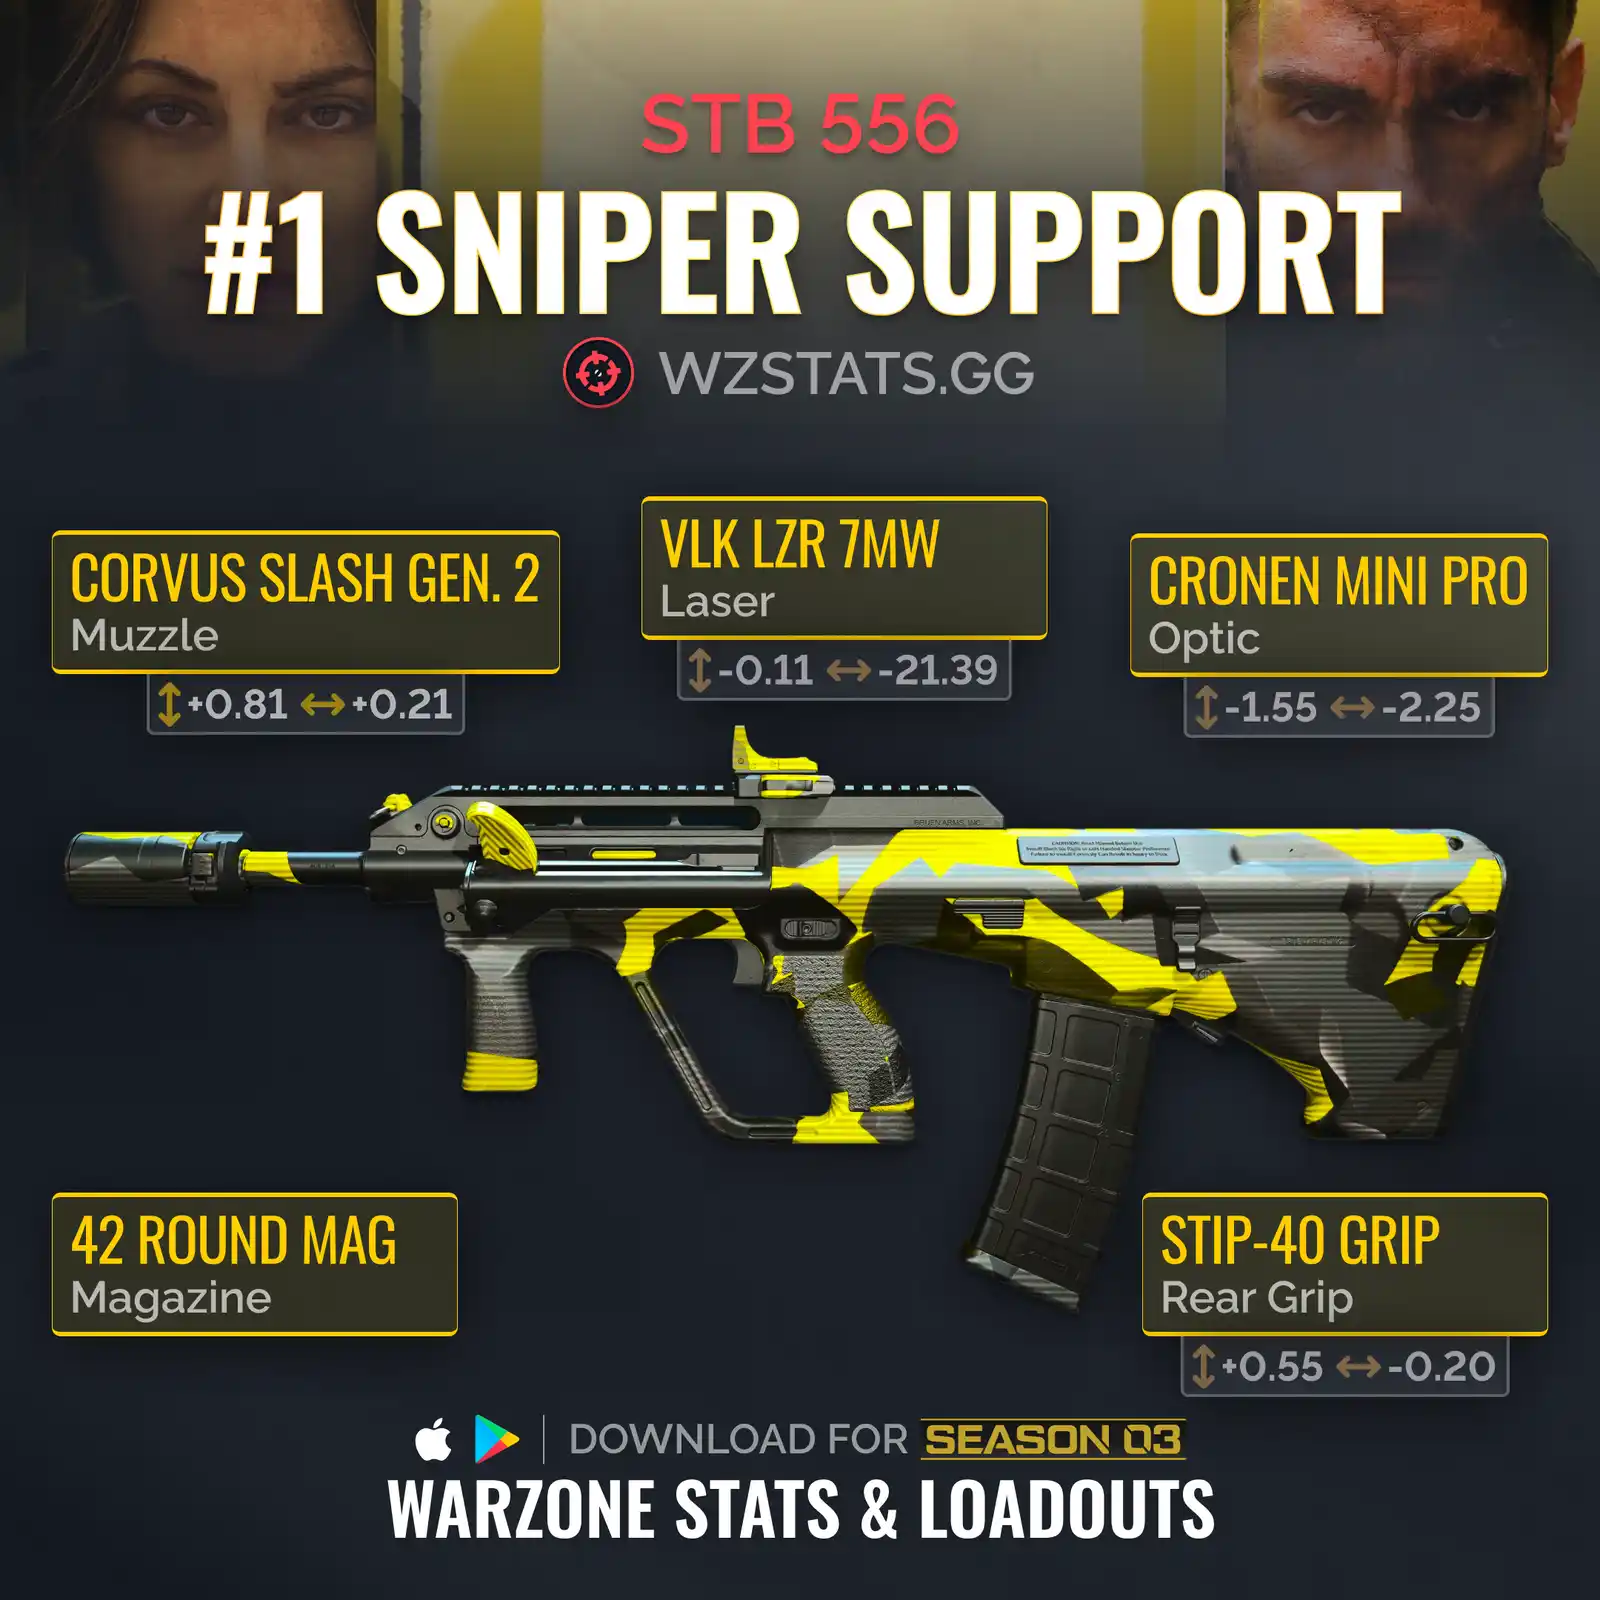 Warzone 2's best sniper loadout to dominate the lobby